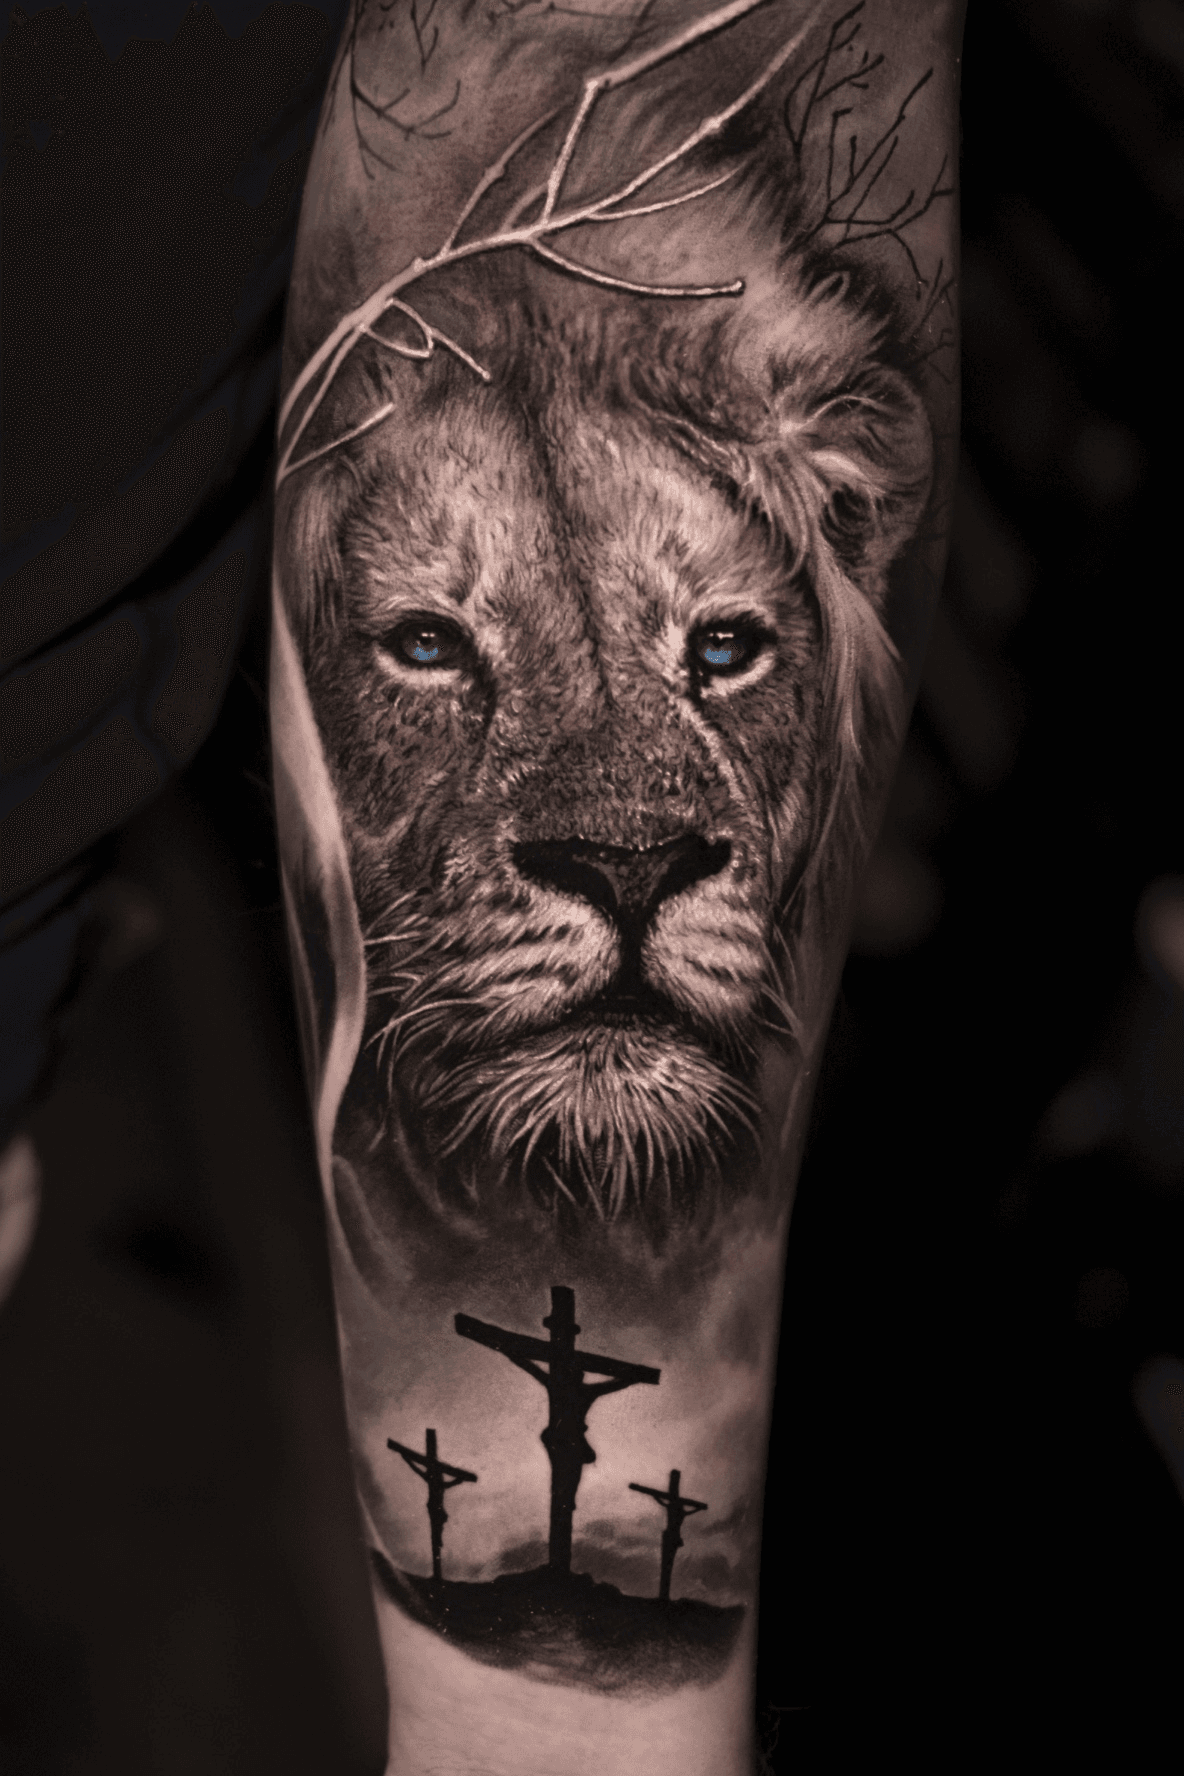 High Society Tattoo  Lion half sleeve done by domino1981 Visit  HSTattooStudiocom for all RatesBookingInquires highsocietytattoo  florida portsaintlucie lion religious jesus cross blackandgrey  realism guyswithtattoos  Facebook